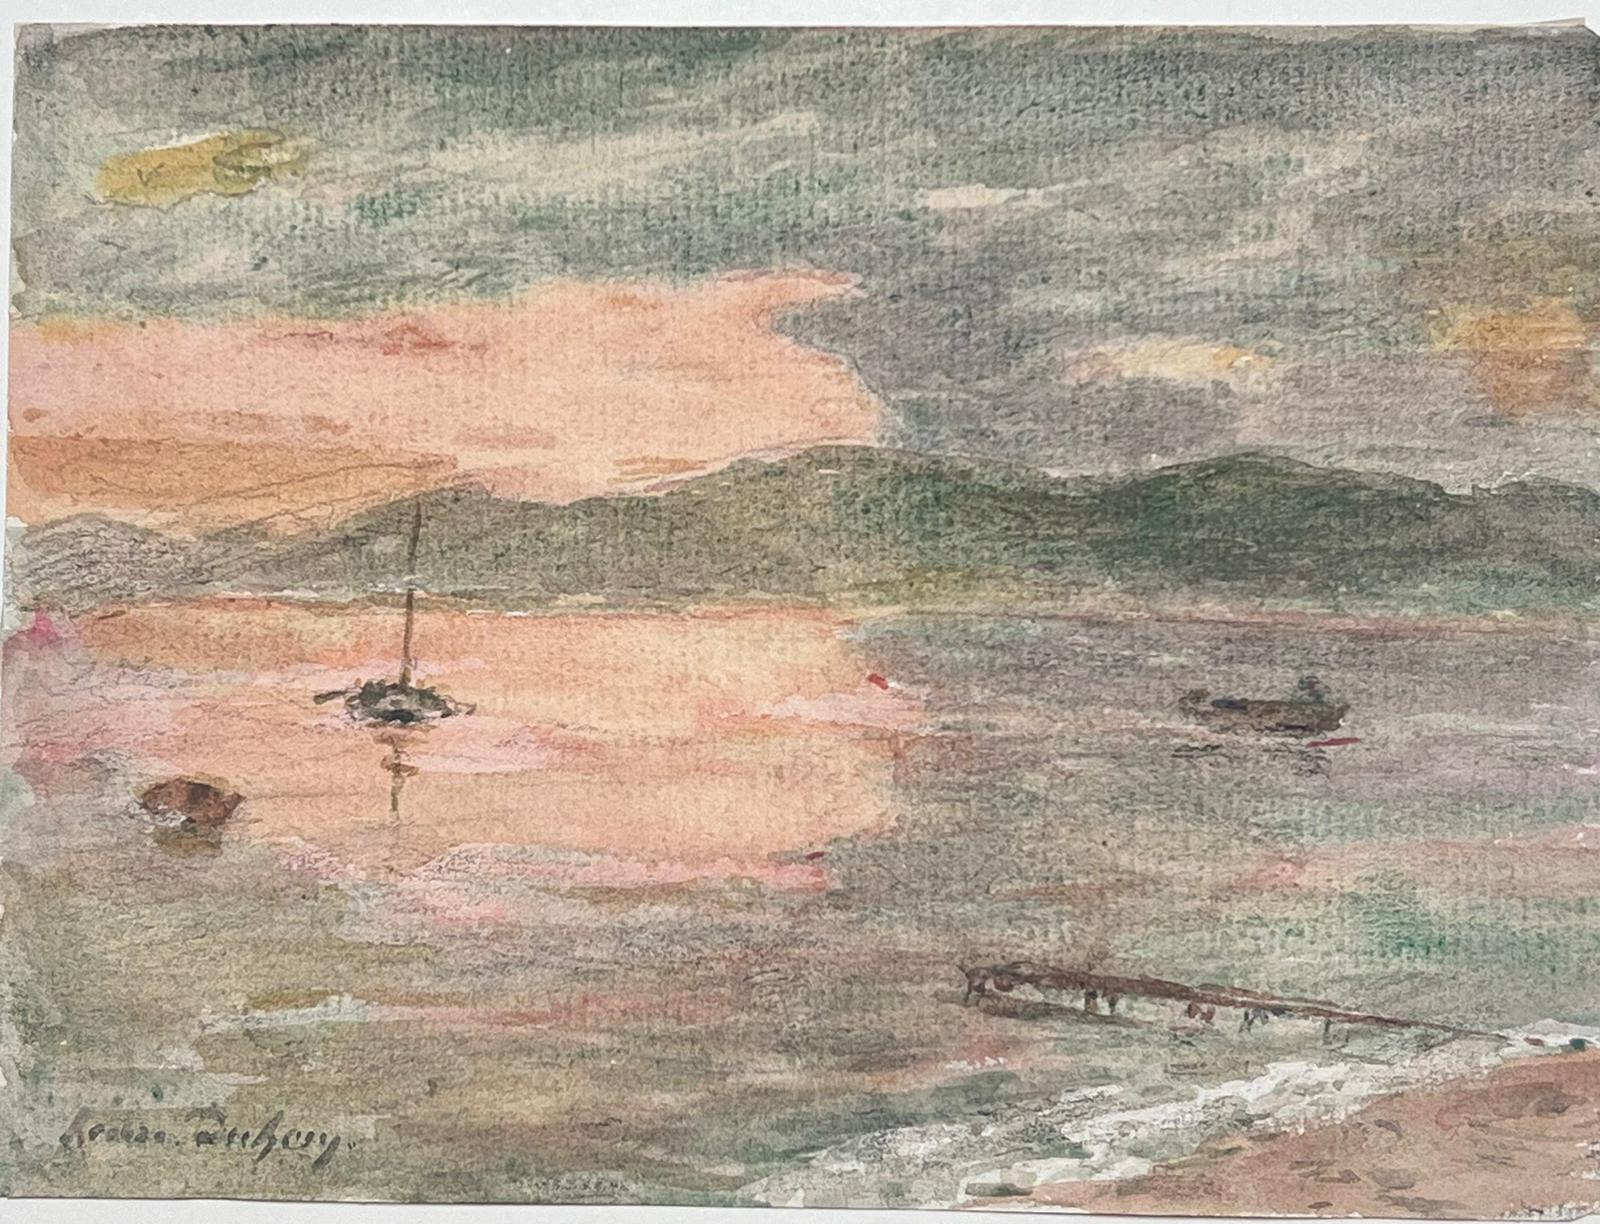 The artist: 
Henri Aime Duhem (1860-1941) French *see notes below, signed 

Title: Sunset at Sea

Medium:  
signed gouache on paper, loosely laid over card, unframed

card: 10 x 12.75 inches
painting: 5 x 6.5 inches

Provenance: 
private collection